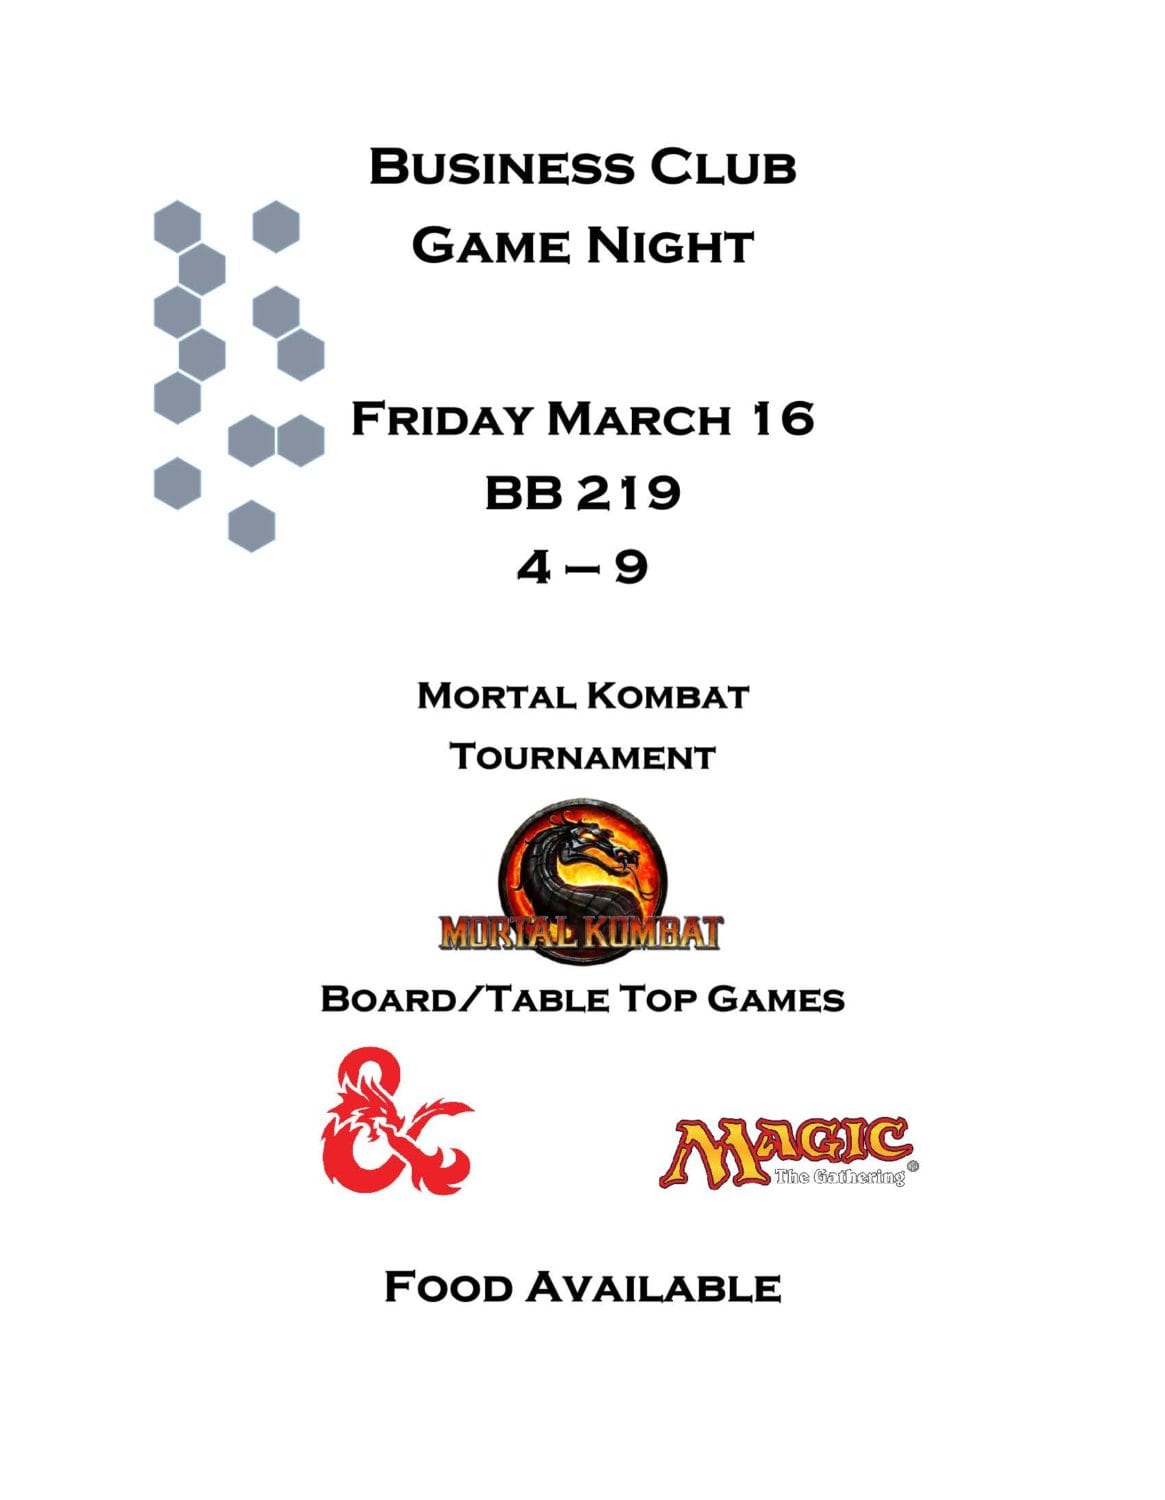 Game on: Business Club Game Night on March 16